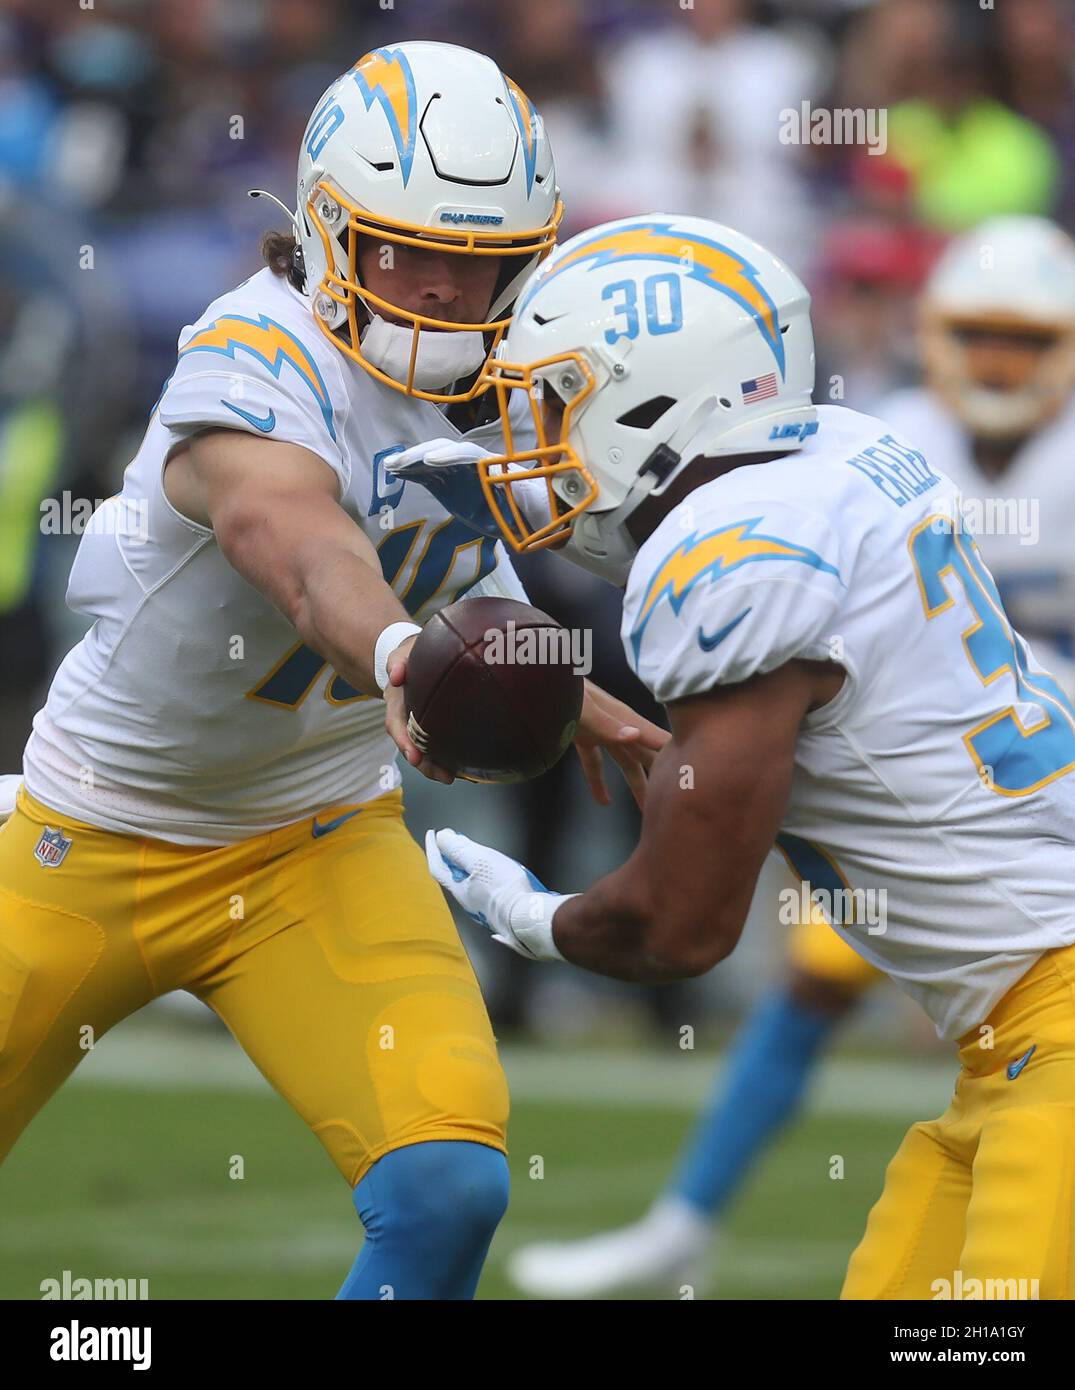 Los Angeles Chargers QB Justin Herbert (10) hands the ball off to Los Angeles Chargers RB Austin Ekeler (30) during a game against the Baltimore Ravens at M&T Bank Stadium in Baltimore, Maryland on October 17, 2021. Photo/ Mike Buscher/Cal Sport Media Stock Photo